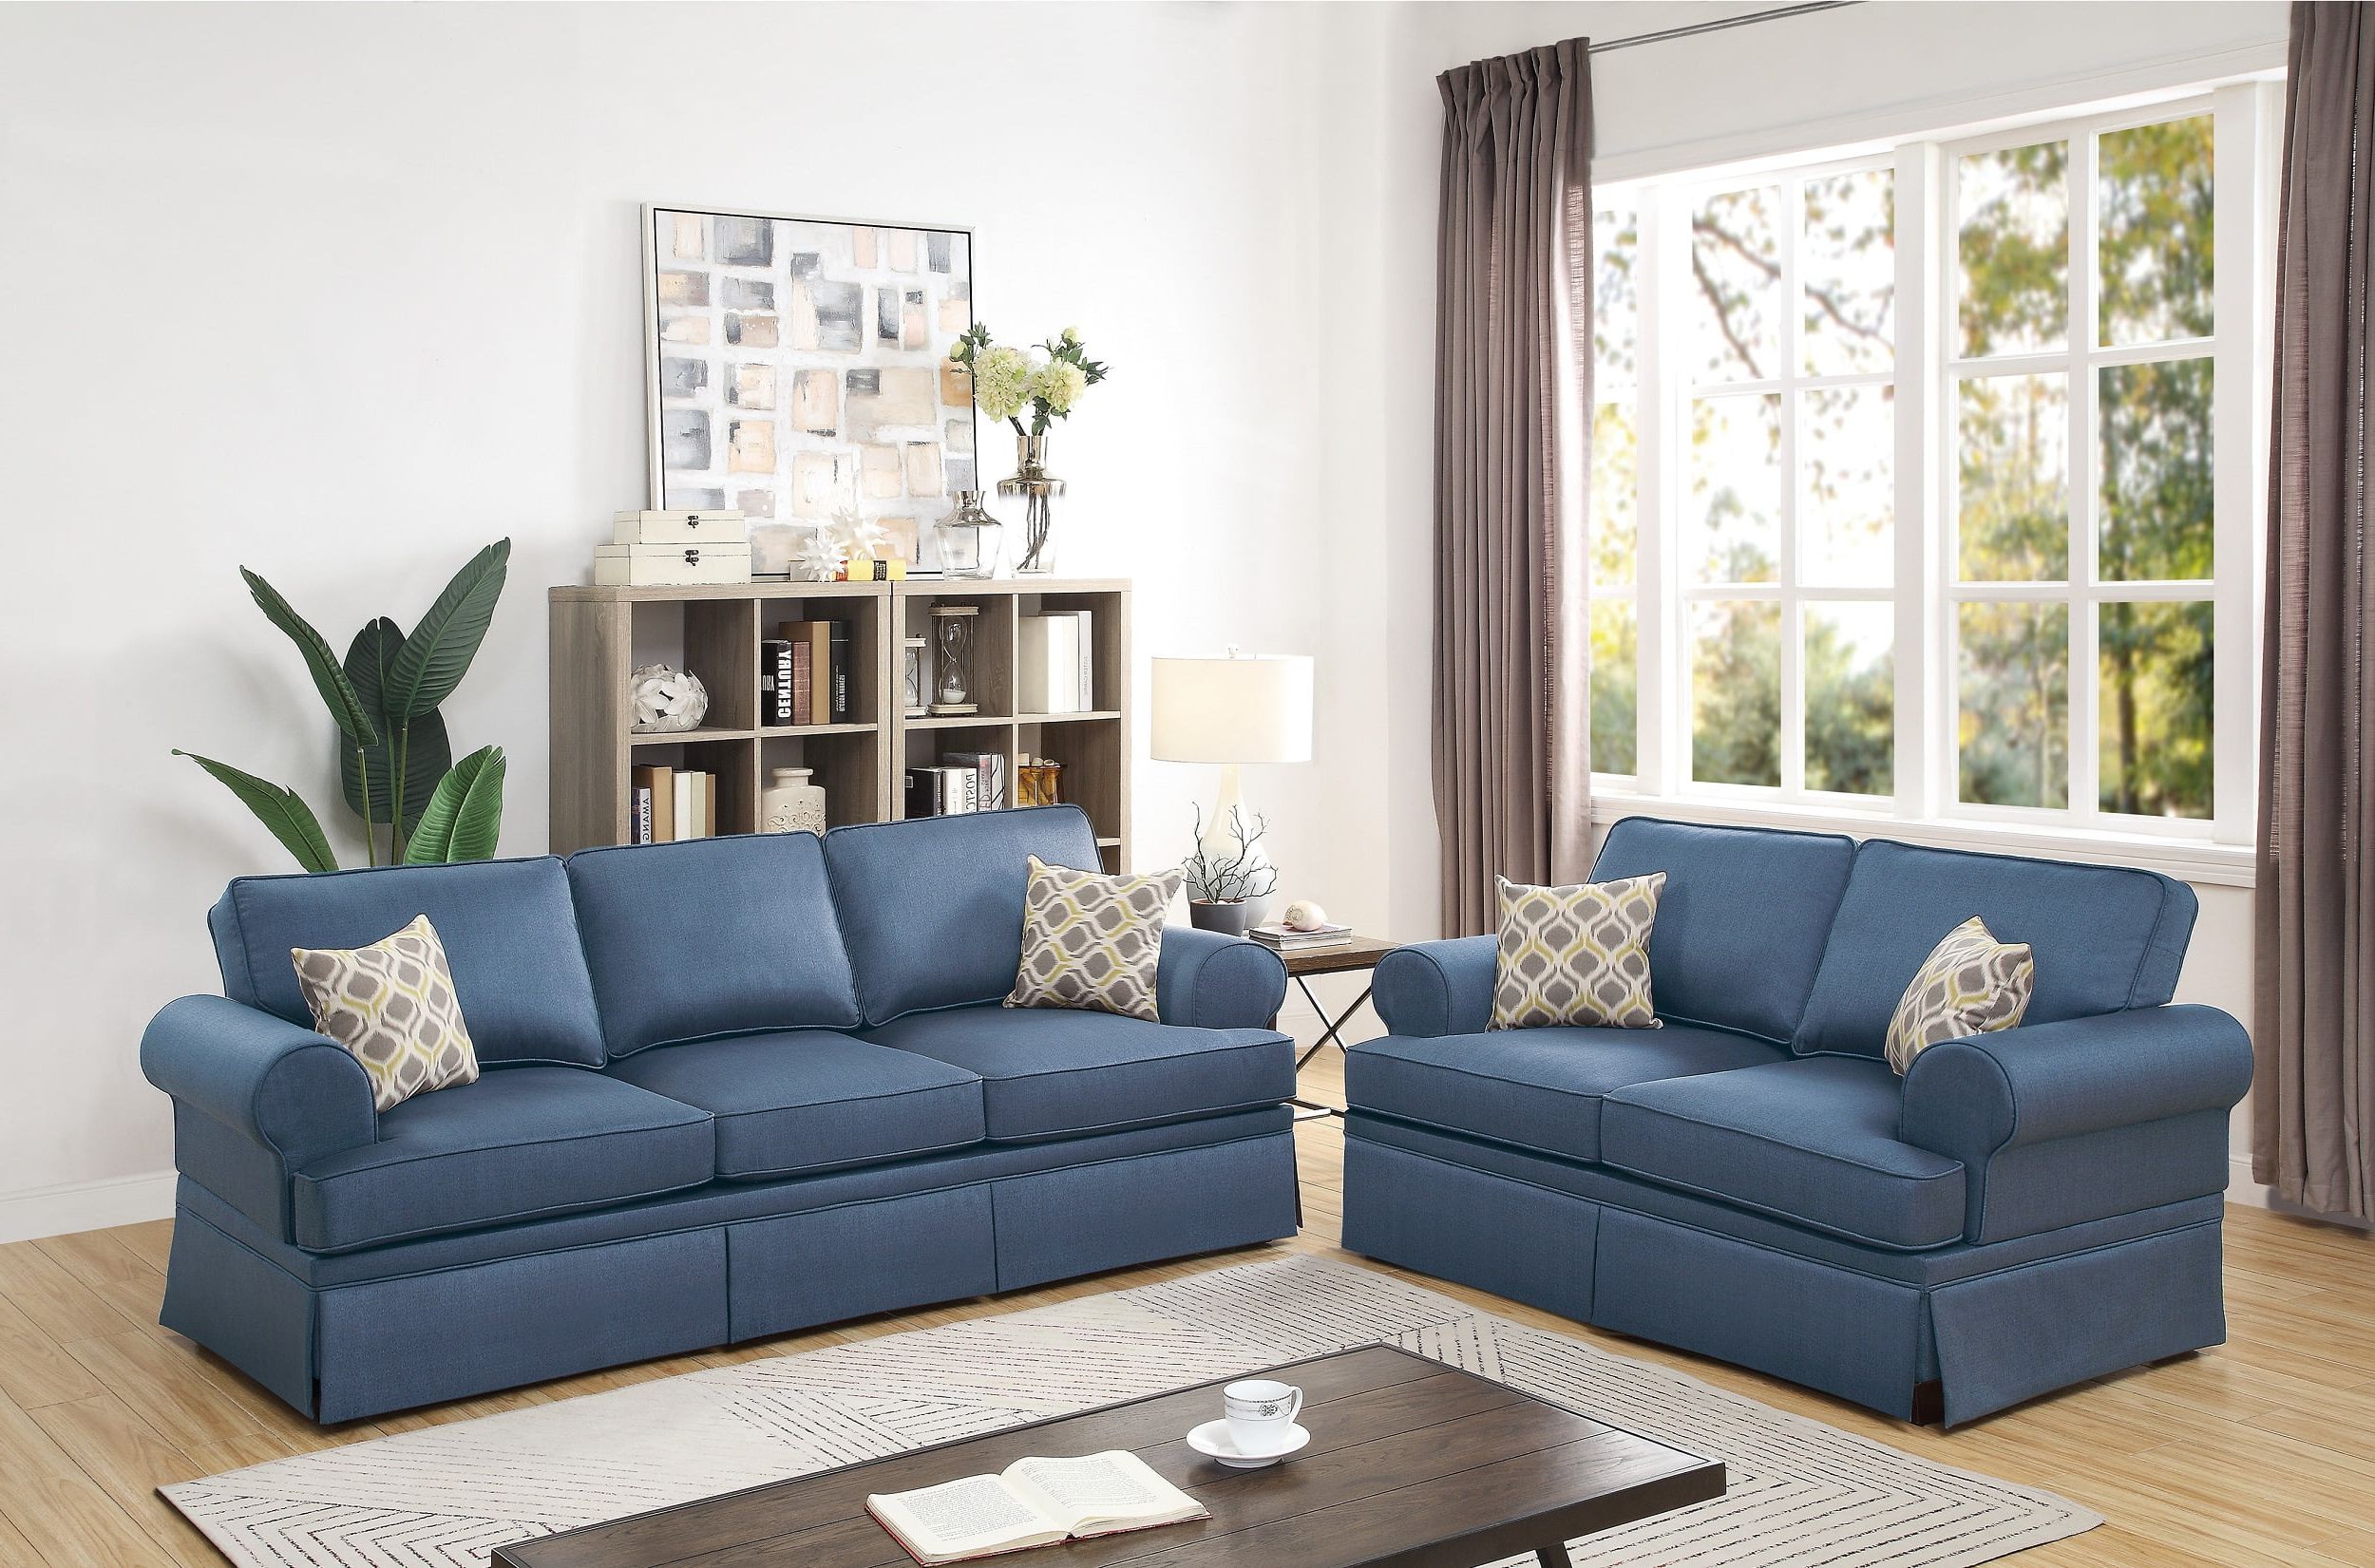 Classic Comfort Cozy Living Room 2pc Sofa Set Sofa And Loveseat Blue Pertaining To Sofas In Blue (Gallery 4 of 20)